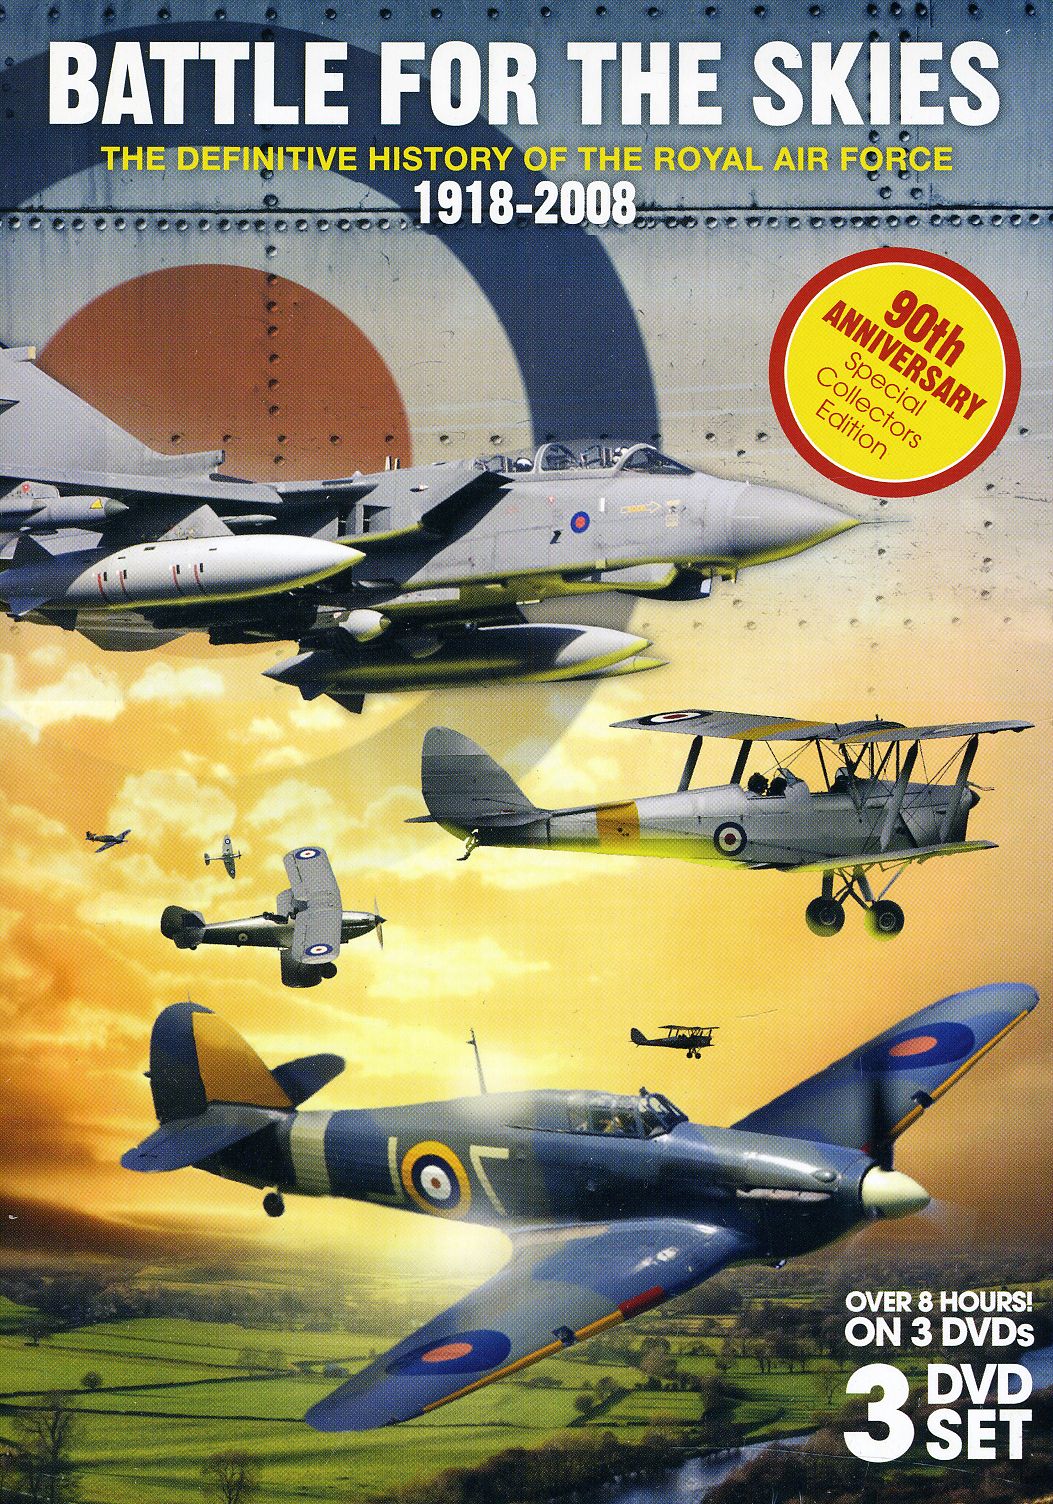 BATTLE FOR THE SKIES: HISTORY OF ROYAL AIR FORCE